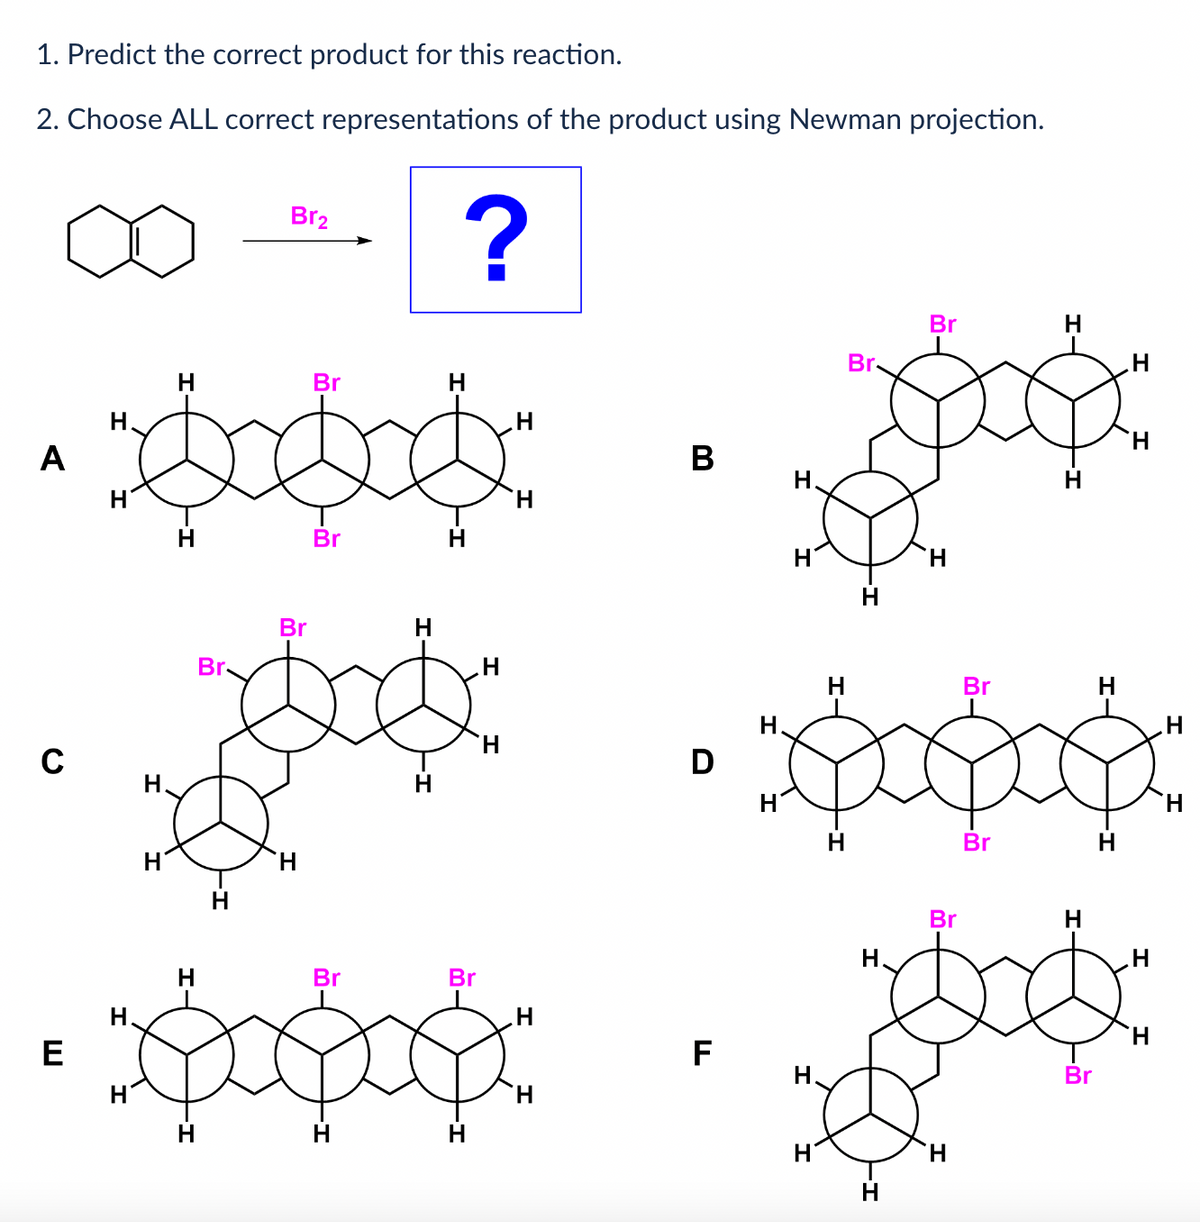 1. Predict the correct product for this reaction.
2. Choose ALL correct representations of the product using Newman projection.
A
E
H
H
H
H.
H
H
H
H
Br.
H
Br₂
Br
H
Br
Br
H
?
H
Br
Br
popoo
H
H
H
H
H
H
H
B
D
F
H.
H
H
H
Br
H
H.
Br
H
Br
H
Br
-
Br
H
H
-
Br
H
H
H
H
.Н
H
H
H